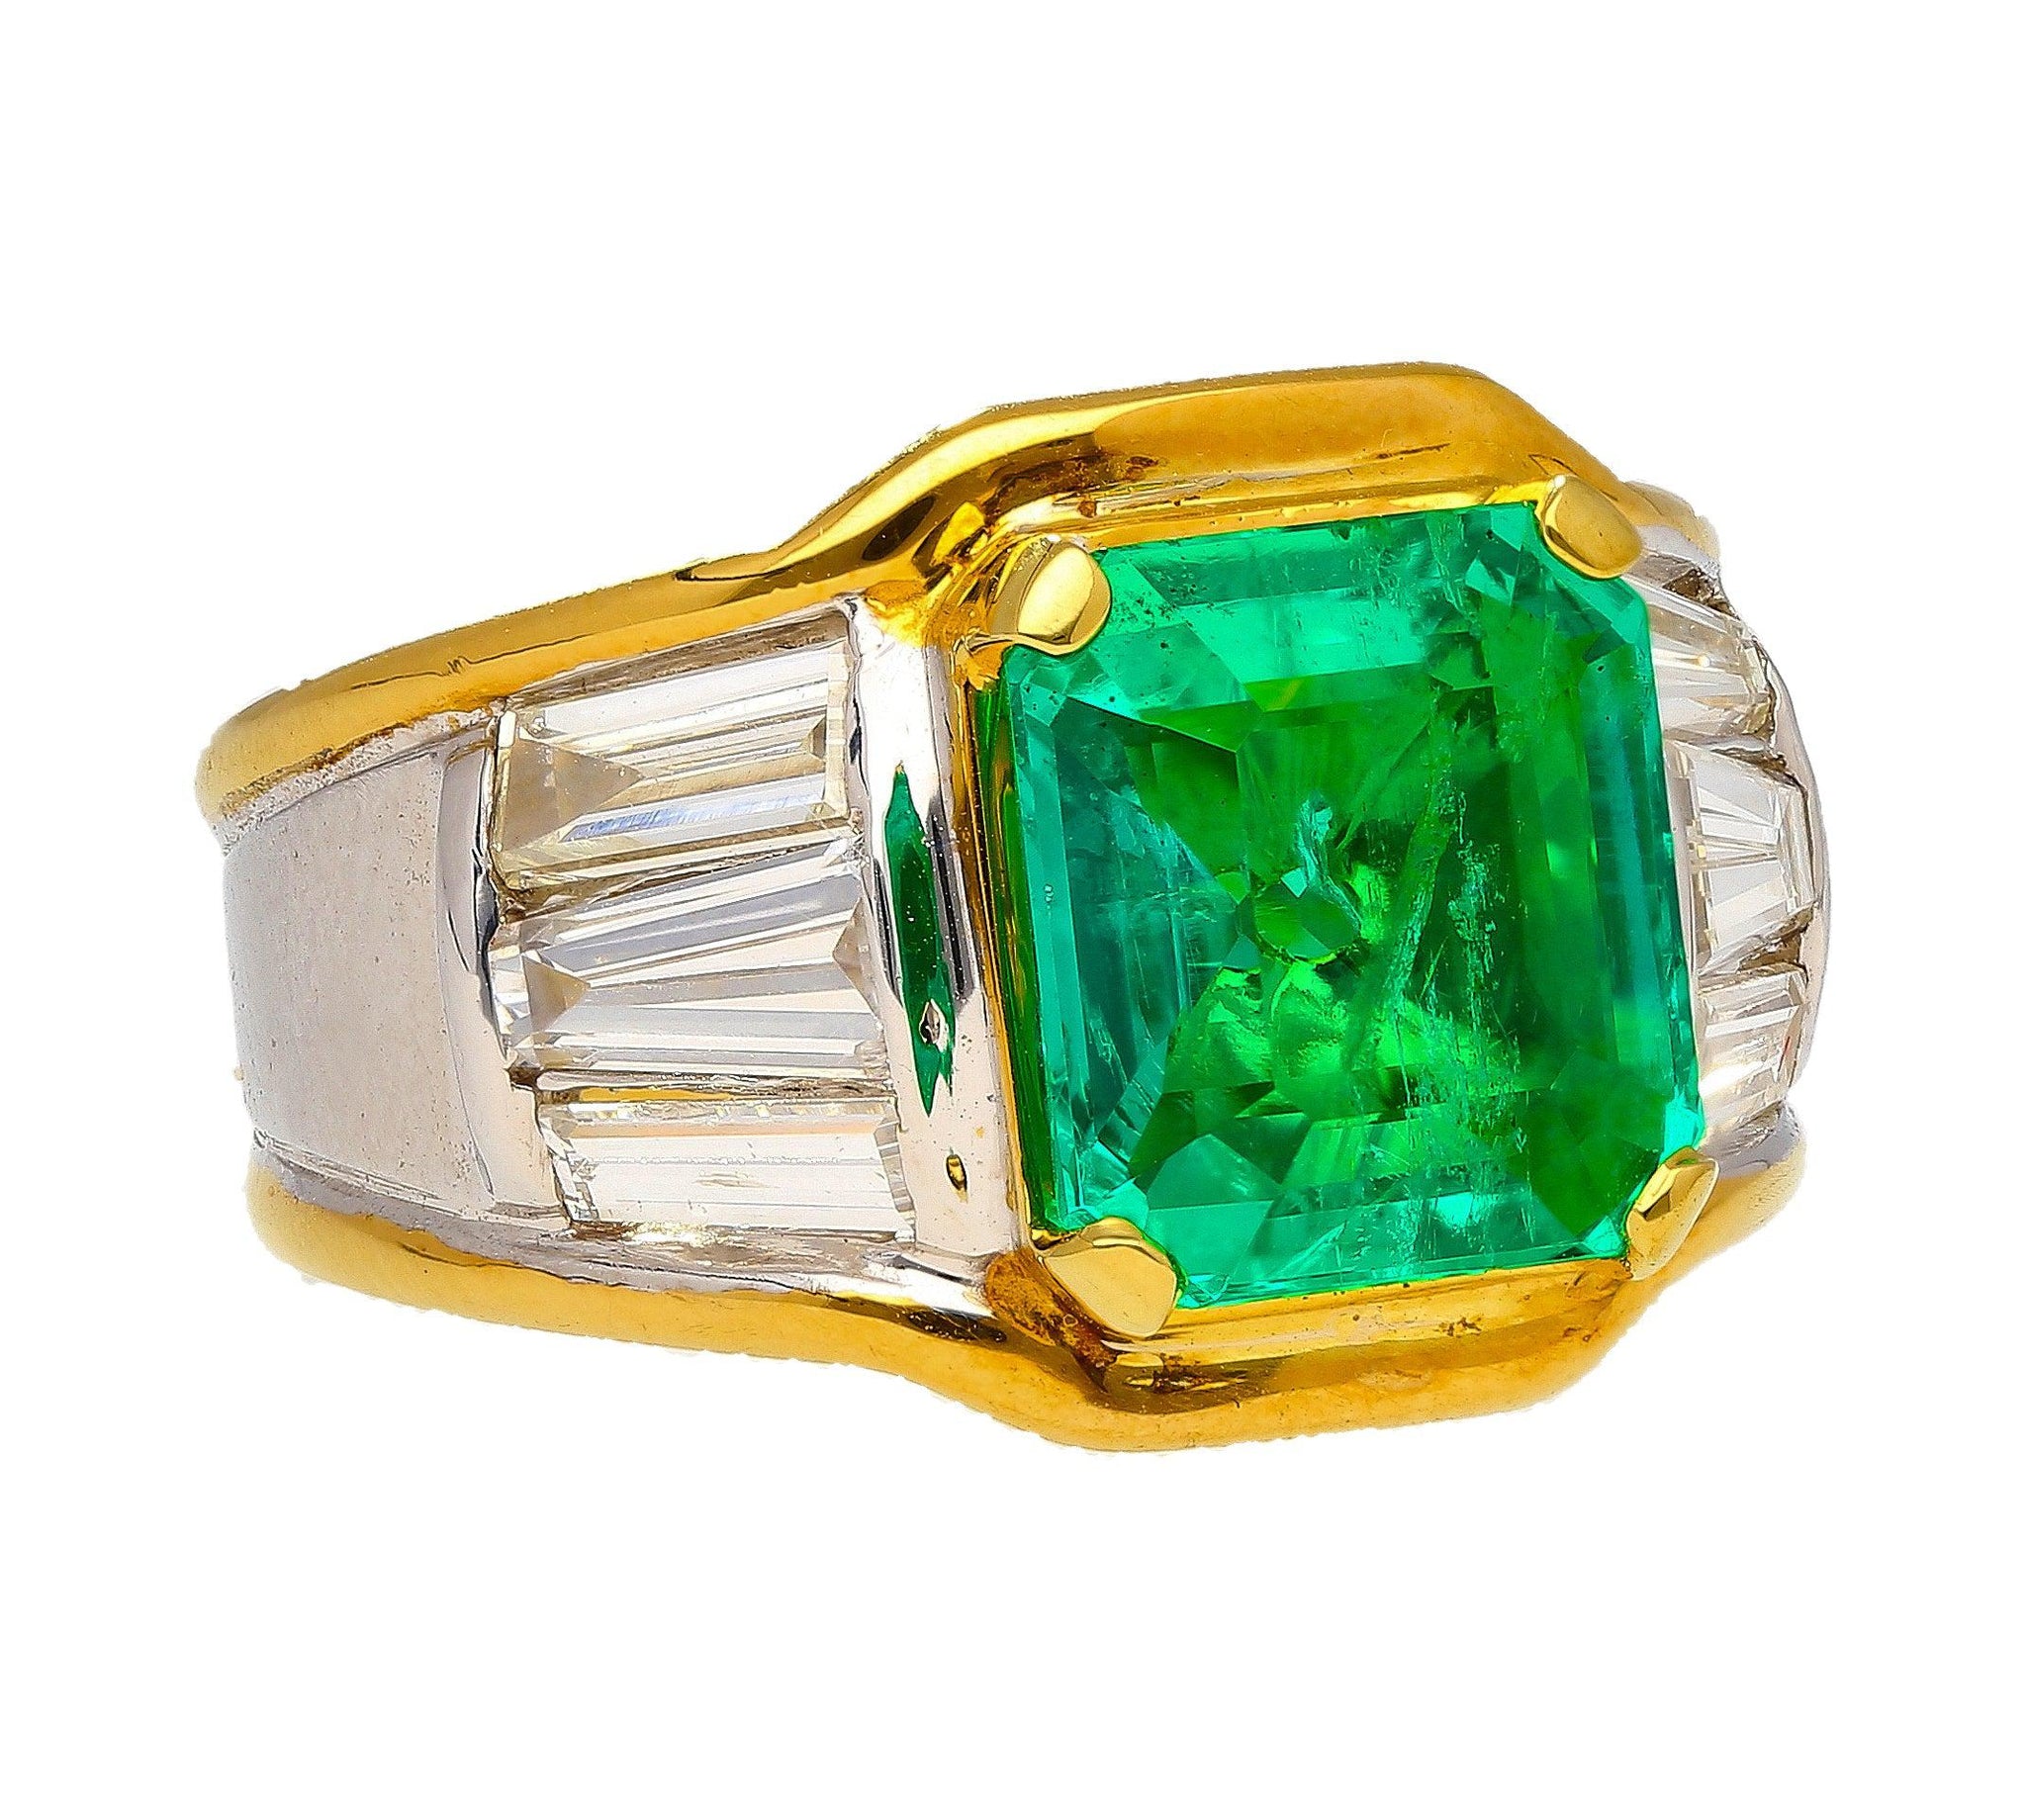 3.16 Carat Colombian Emerald Insignificant Oil Unisex Ring in Platinum & 18K Gold